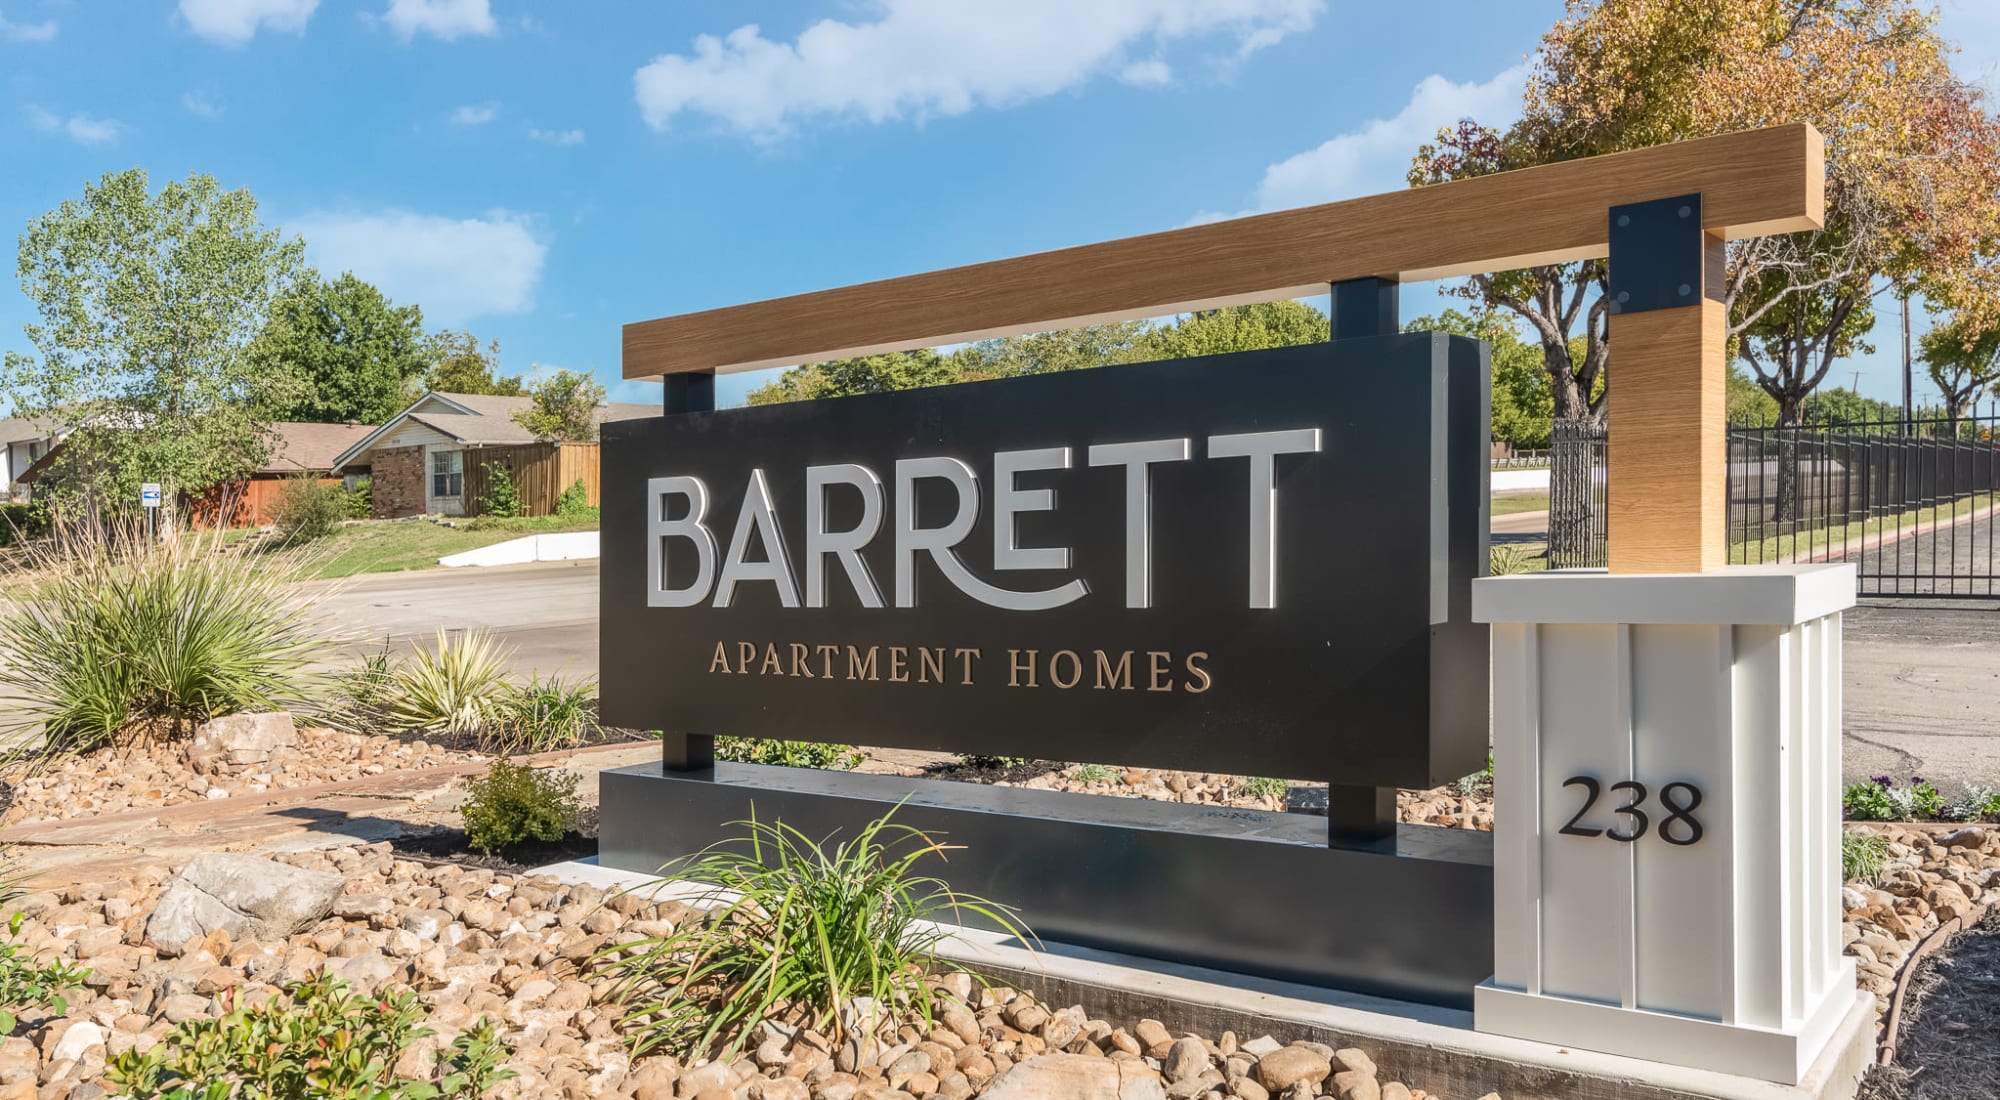 Map + Directions at Barrett Apartment Homes in Garland, Texas